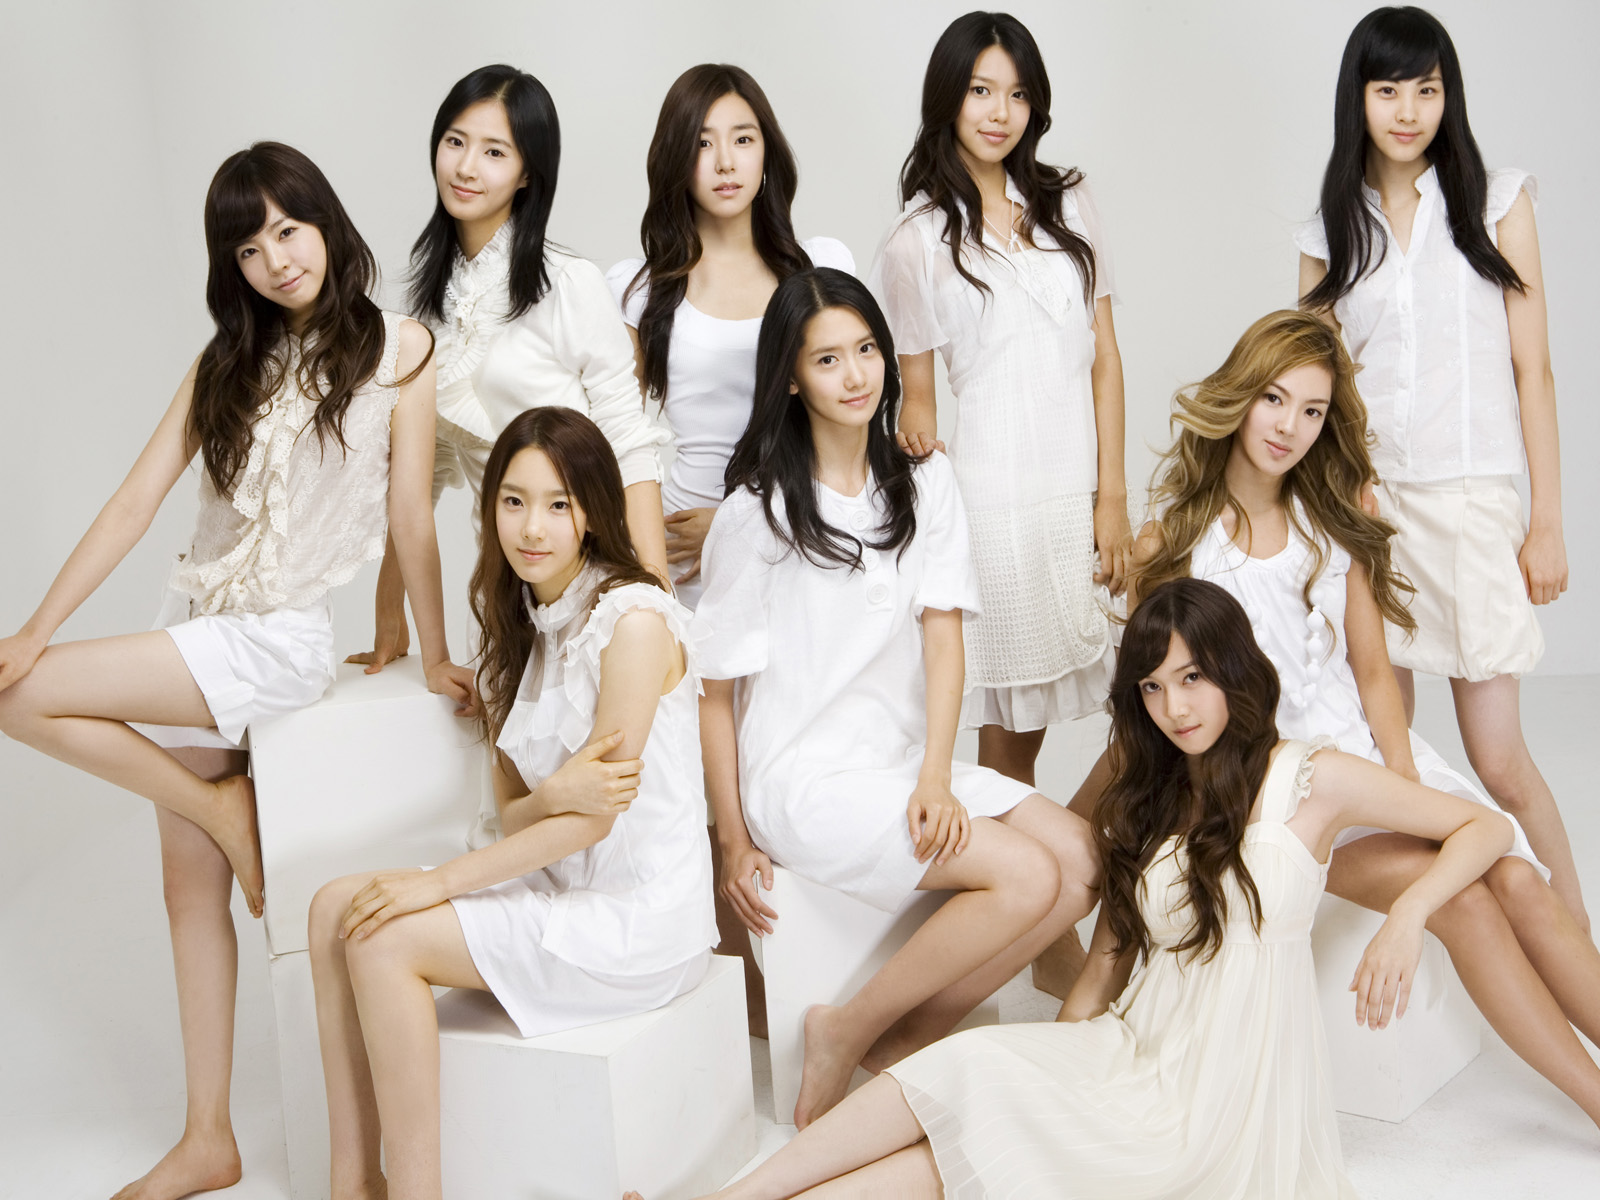 Snsd - HD Wallpapers